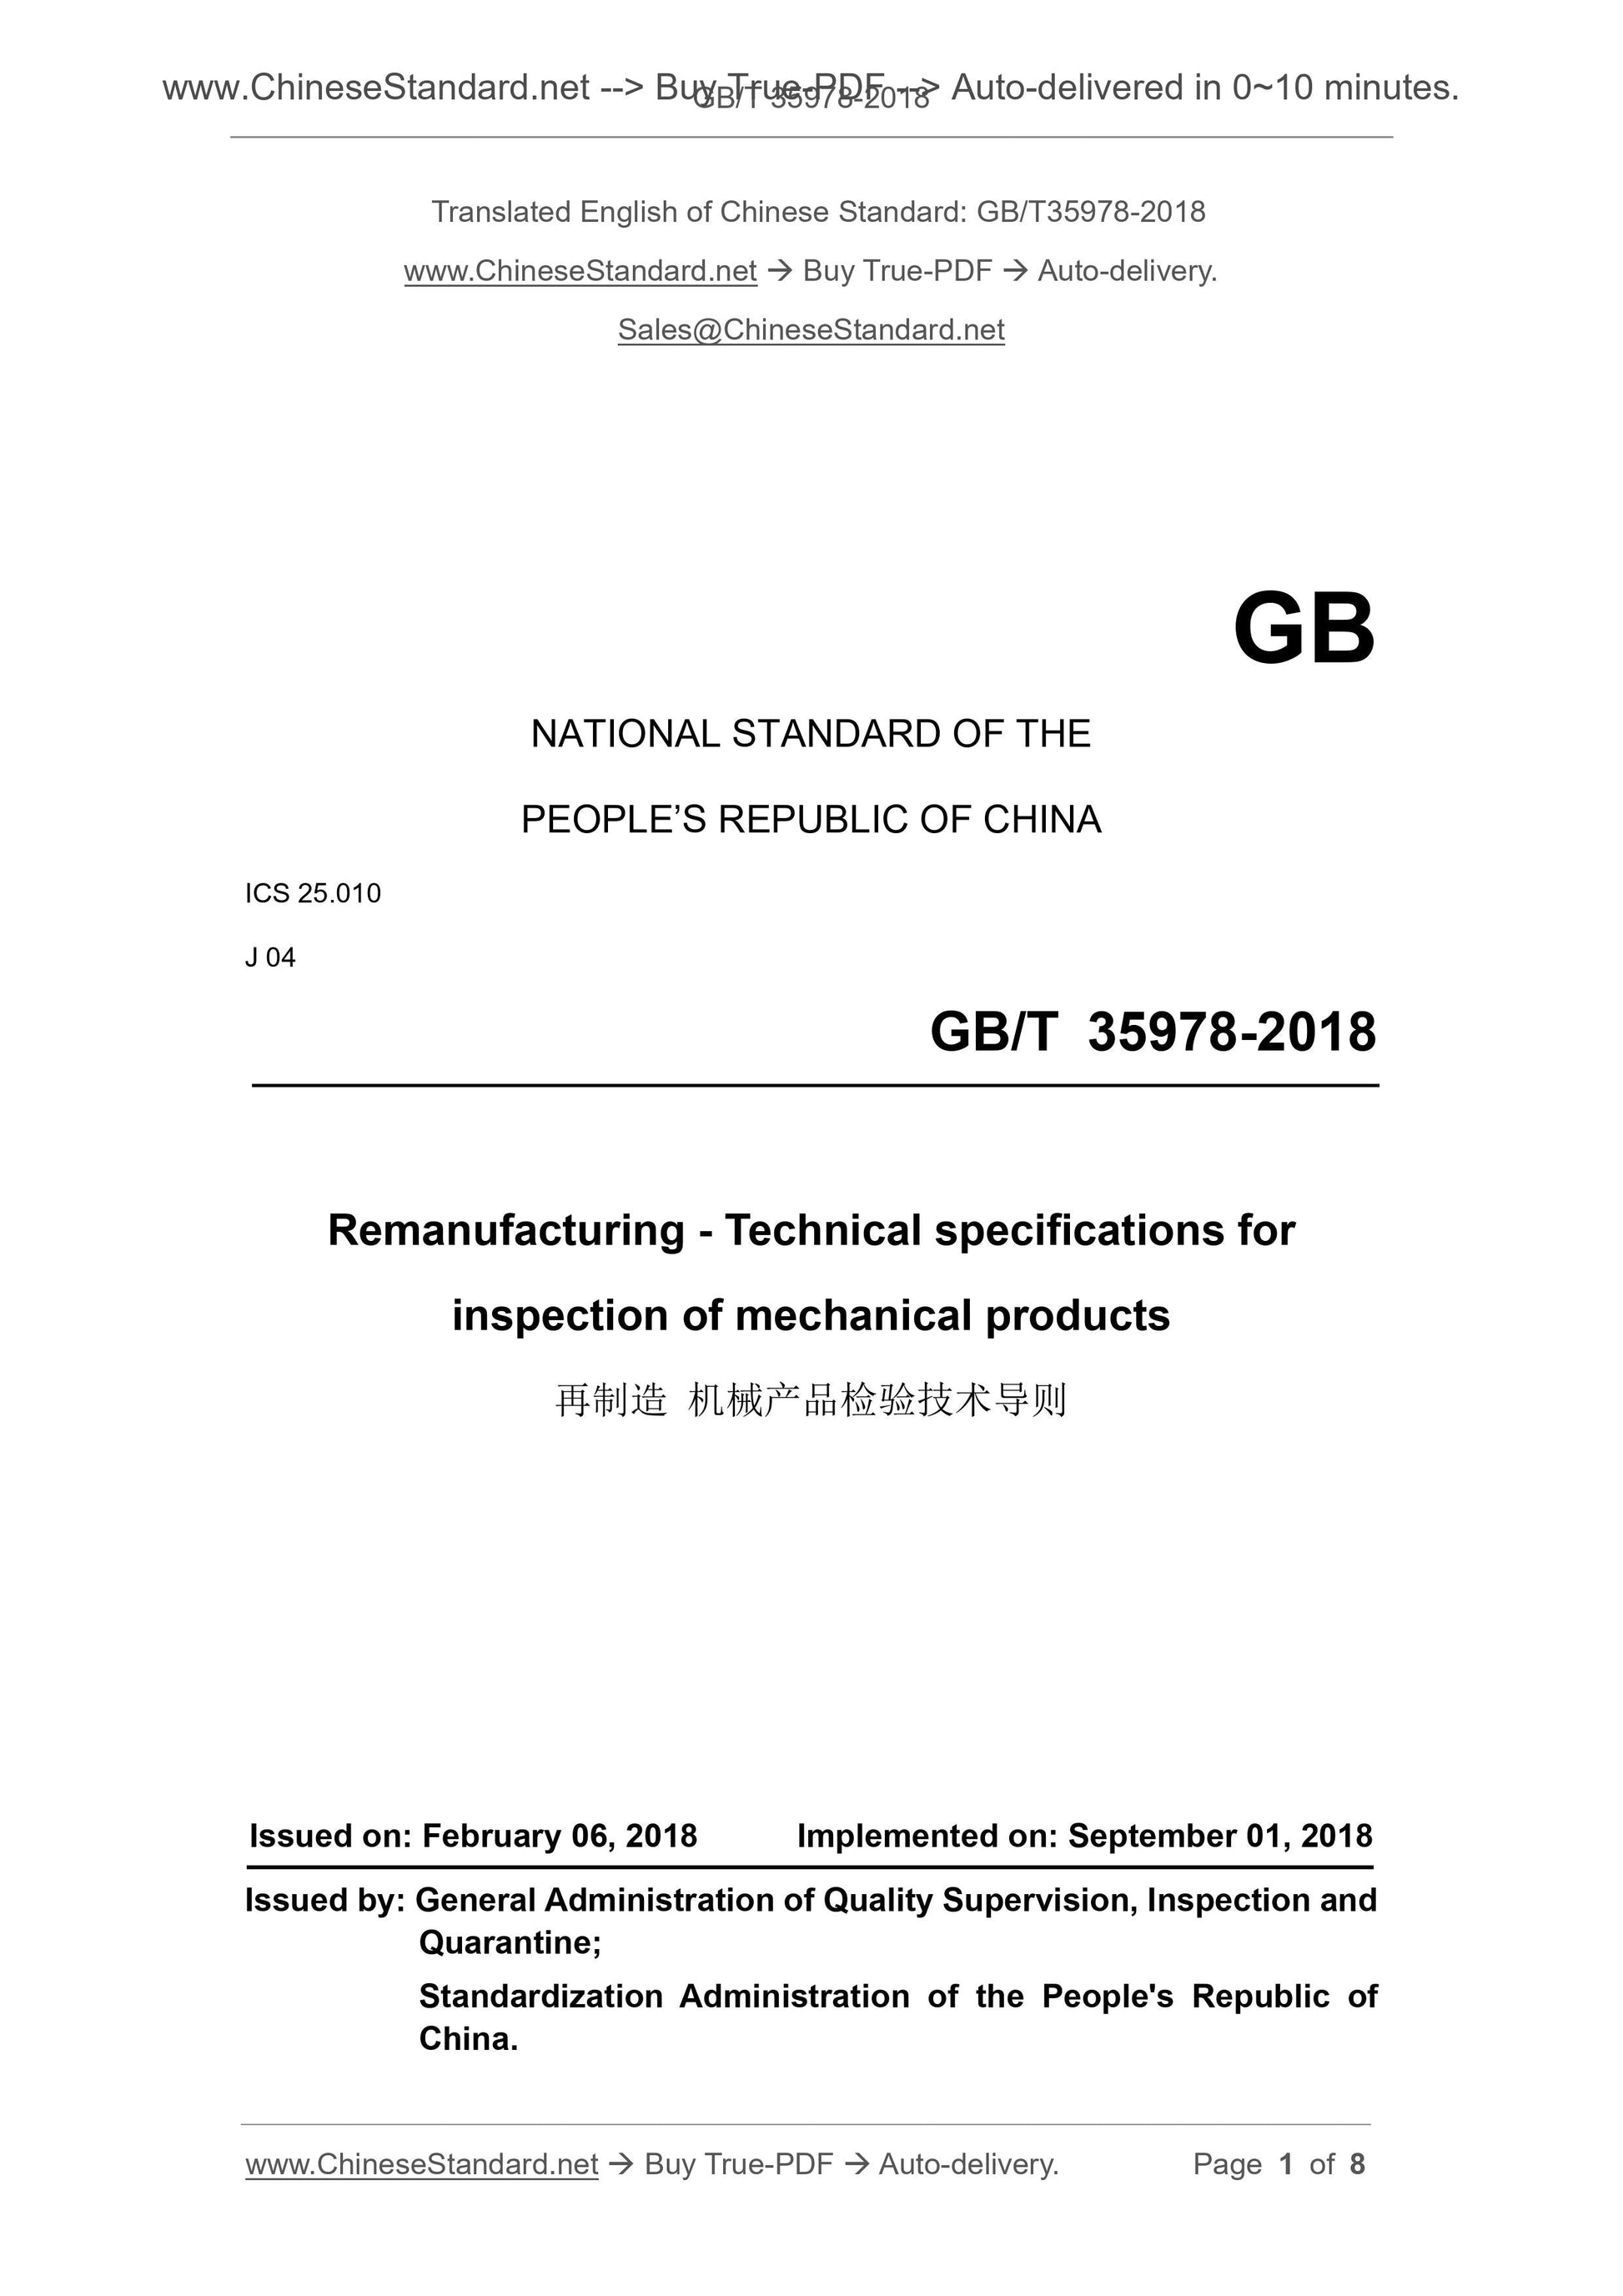 GB/T 35978-2018 Page 1